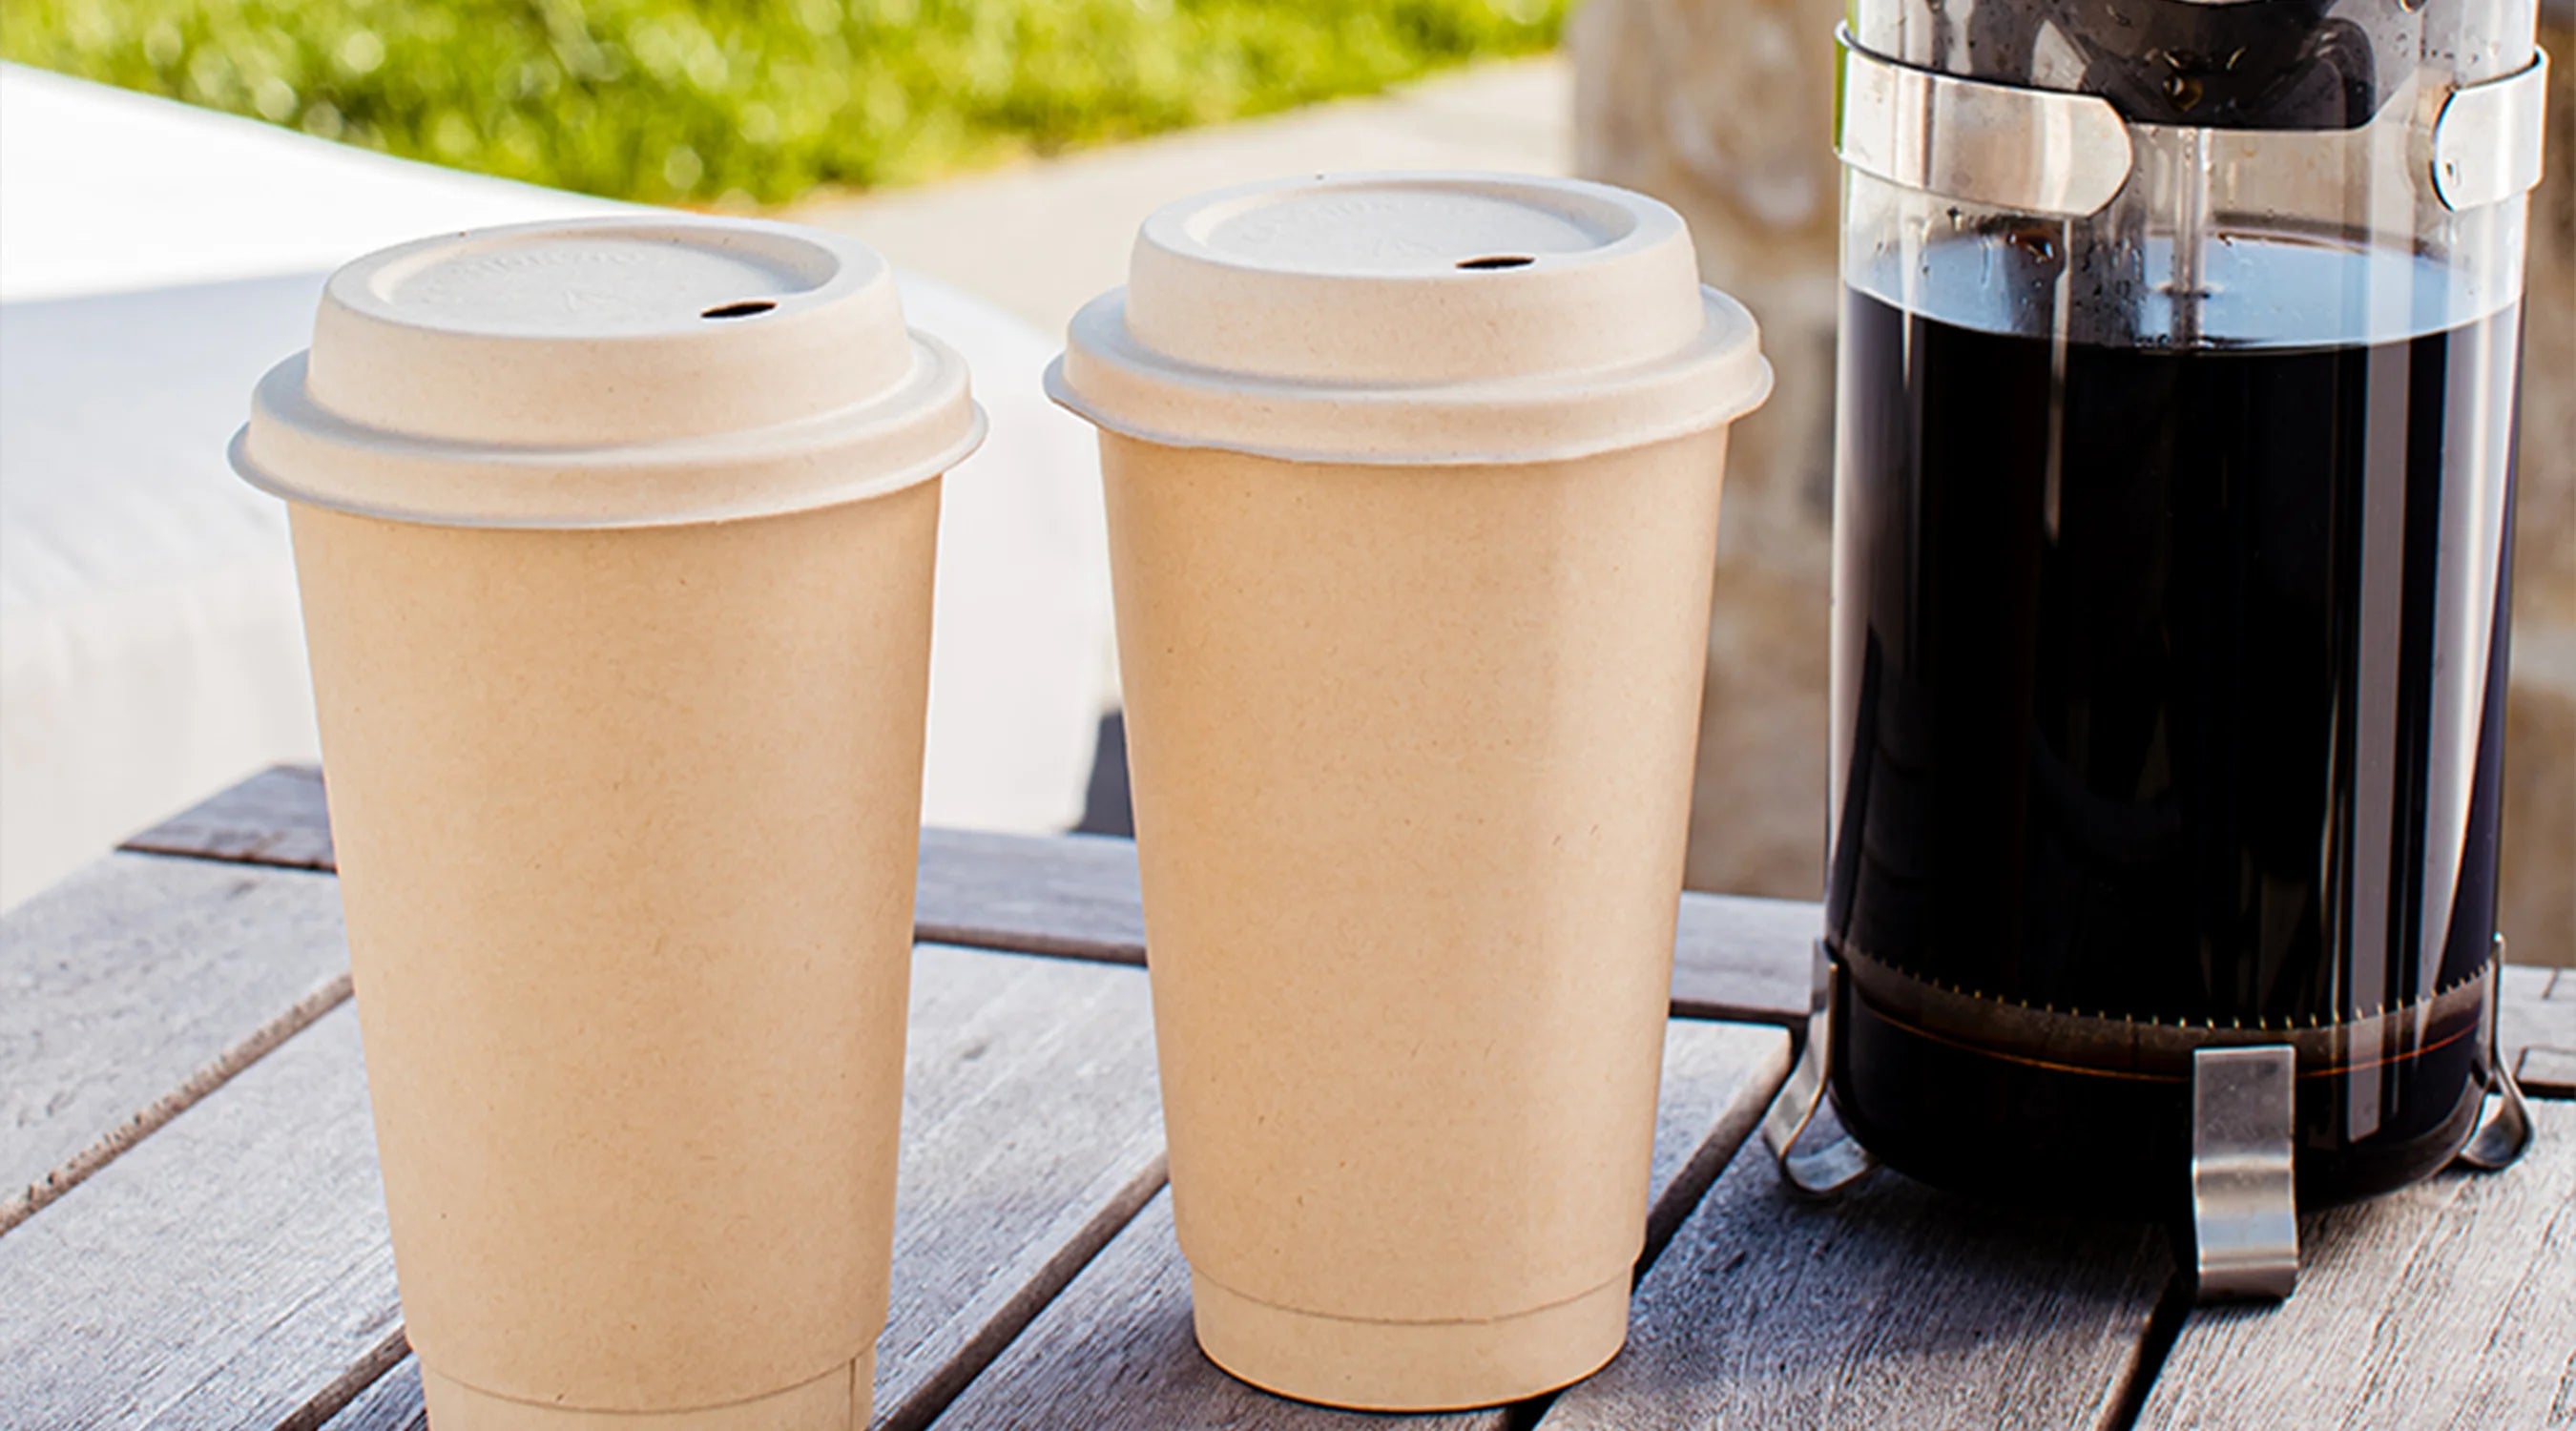 Two compostable hot cups beside a coffee maker